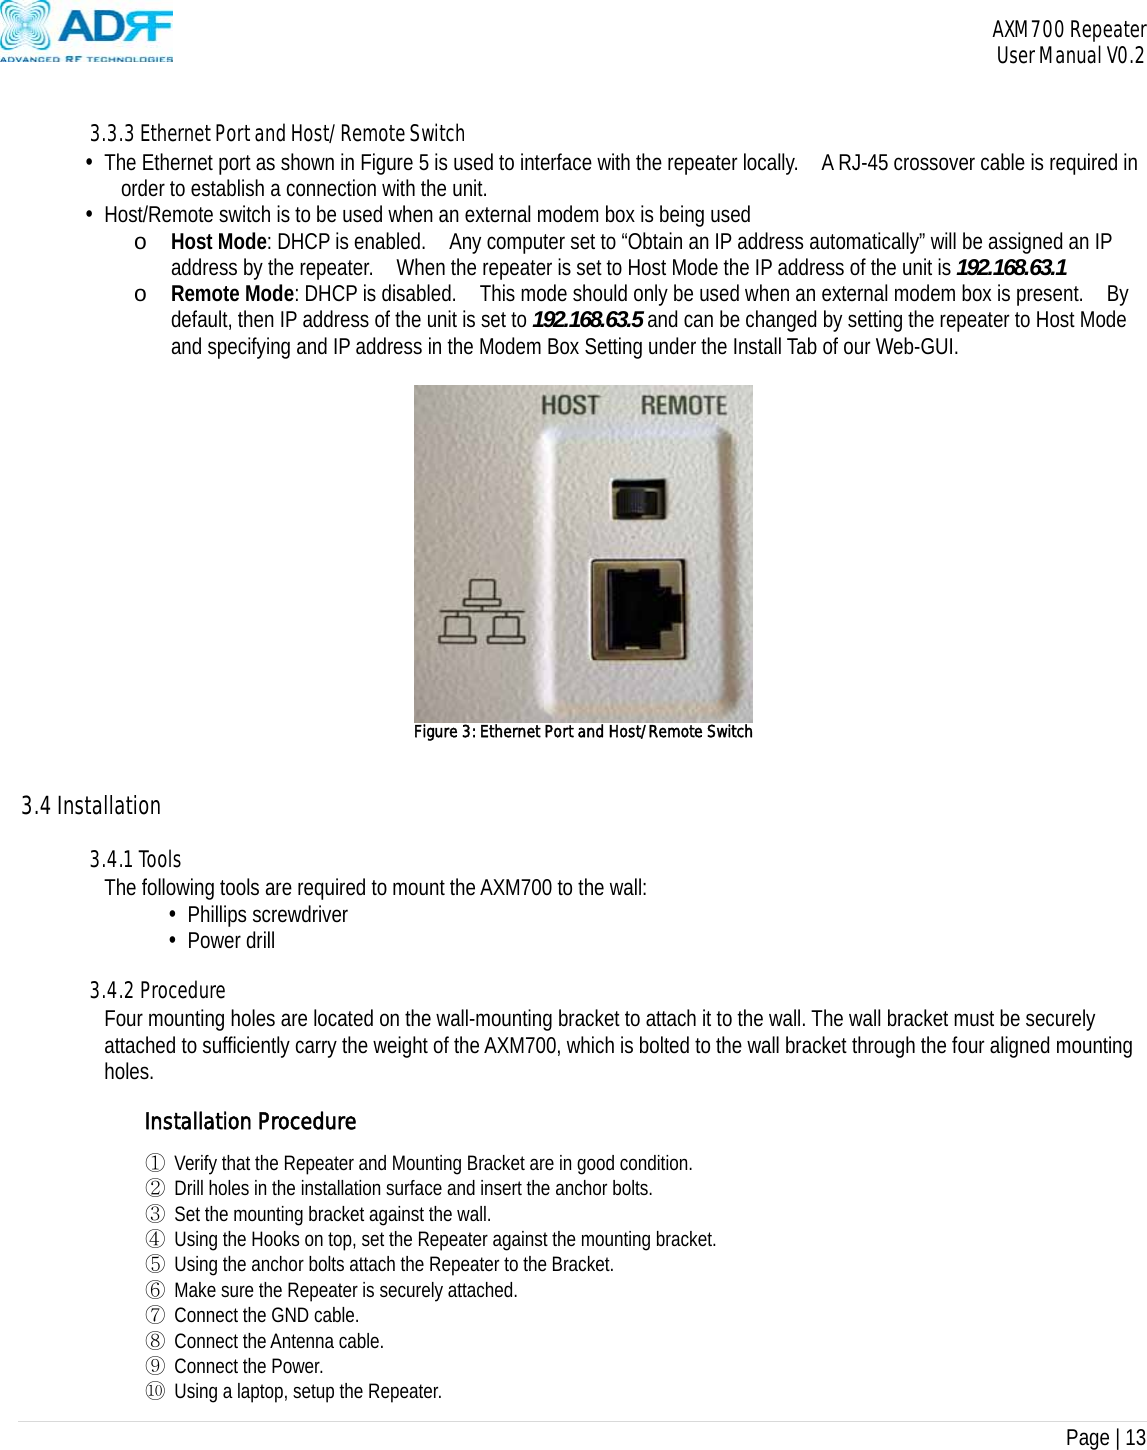 AXM700 Repeater     User Manual V0.2  Page | 13     3.3.3 Ethernet Port and Host/Remote Switch • The Ethernet port as shown in Figure 5 is used to interface with the repeater locally.    A RJ-45 crossover cable is required in order to establish a connection with the unit. • Host/Remote switch is to be used when an external modem box is being used o Host Mode: DHCP is enabled.    Any computer set to “Obtain an IP address automatically” will be assigned an IP address by the repeater.    When the repeater is set to Host Mode the IP address of the unit is 192.168.63.1 o Remote Mode: DHCP is disabled.    This mode should only be used when an external modem box is present.    By default, then IP address of the unit is set to 192.168.63.5 and can be changed by setting the repeater to Host Mode and specifying and IP address in the Modem Box Setting under the Install Tab of our Web-GUI.   Figure 3: Ethernet Port and Host/Remote Switch    3.4 Installation  3.4.1 Tools The following tools are required to mount the AXM700 to the wall: • Phillips screwdriver • Power drill  3.4.2 Procedure Four mounting holes are located on the wall-mounting bracket to attach it to the wall. The wall bracket must be securely attached to sufficiently carry the weight of the AXM700, which is bolted to the wall bracket through the four aligned mounting holes.   Installation Procedure ① Verify that the Repeater and Mounting Bracket are in good condition. ② Drill holes in the installation surface and insert the anchor bolts. ③ Set the mounting bracket against the wall. ④ Using the Hooks on top, set the Repeater against the mounting bracket. ⑤ Using the anchor bolts attach the Repeater to the Bracket. ⑥ Make sure the Repeater is securely attached. ⑦ Connect the GND cable. ⑧ Connect the Antenna cable. ⑨ Connect the Power. ⑩ Using a laptop, setup the Repeater. 